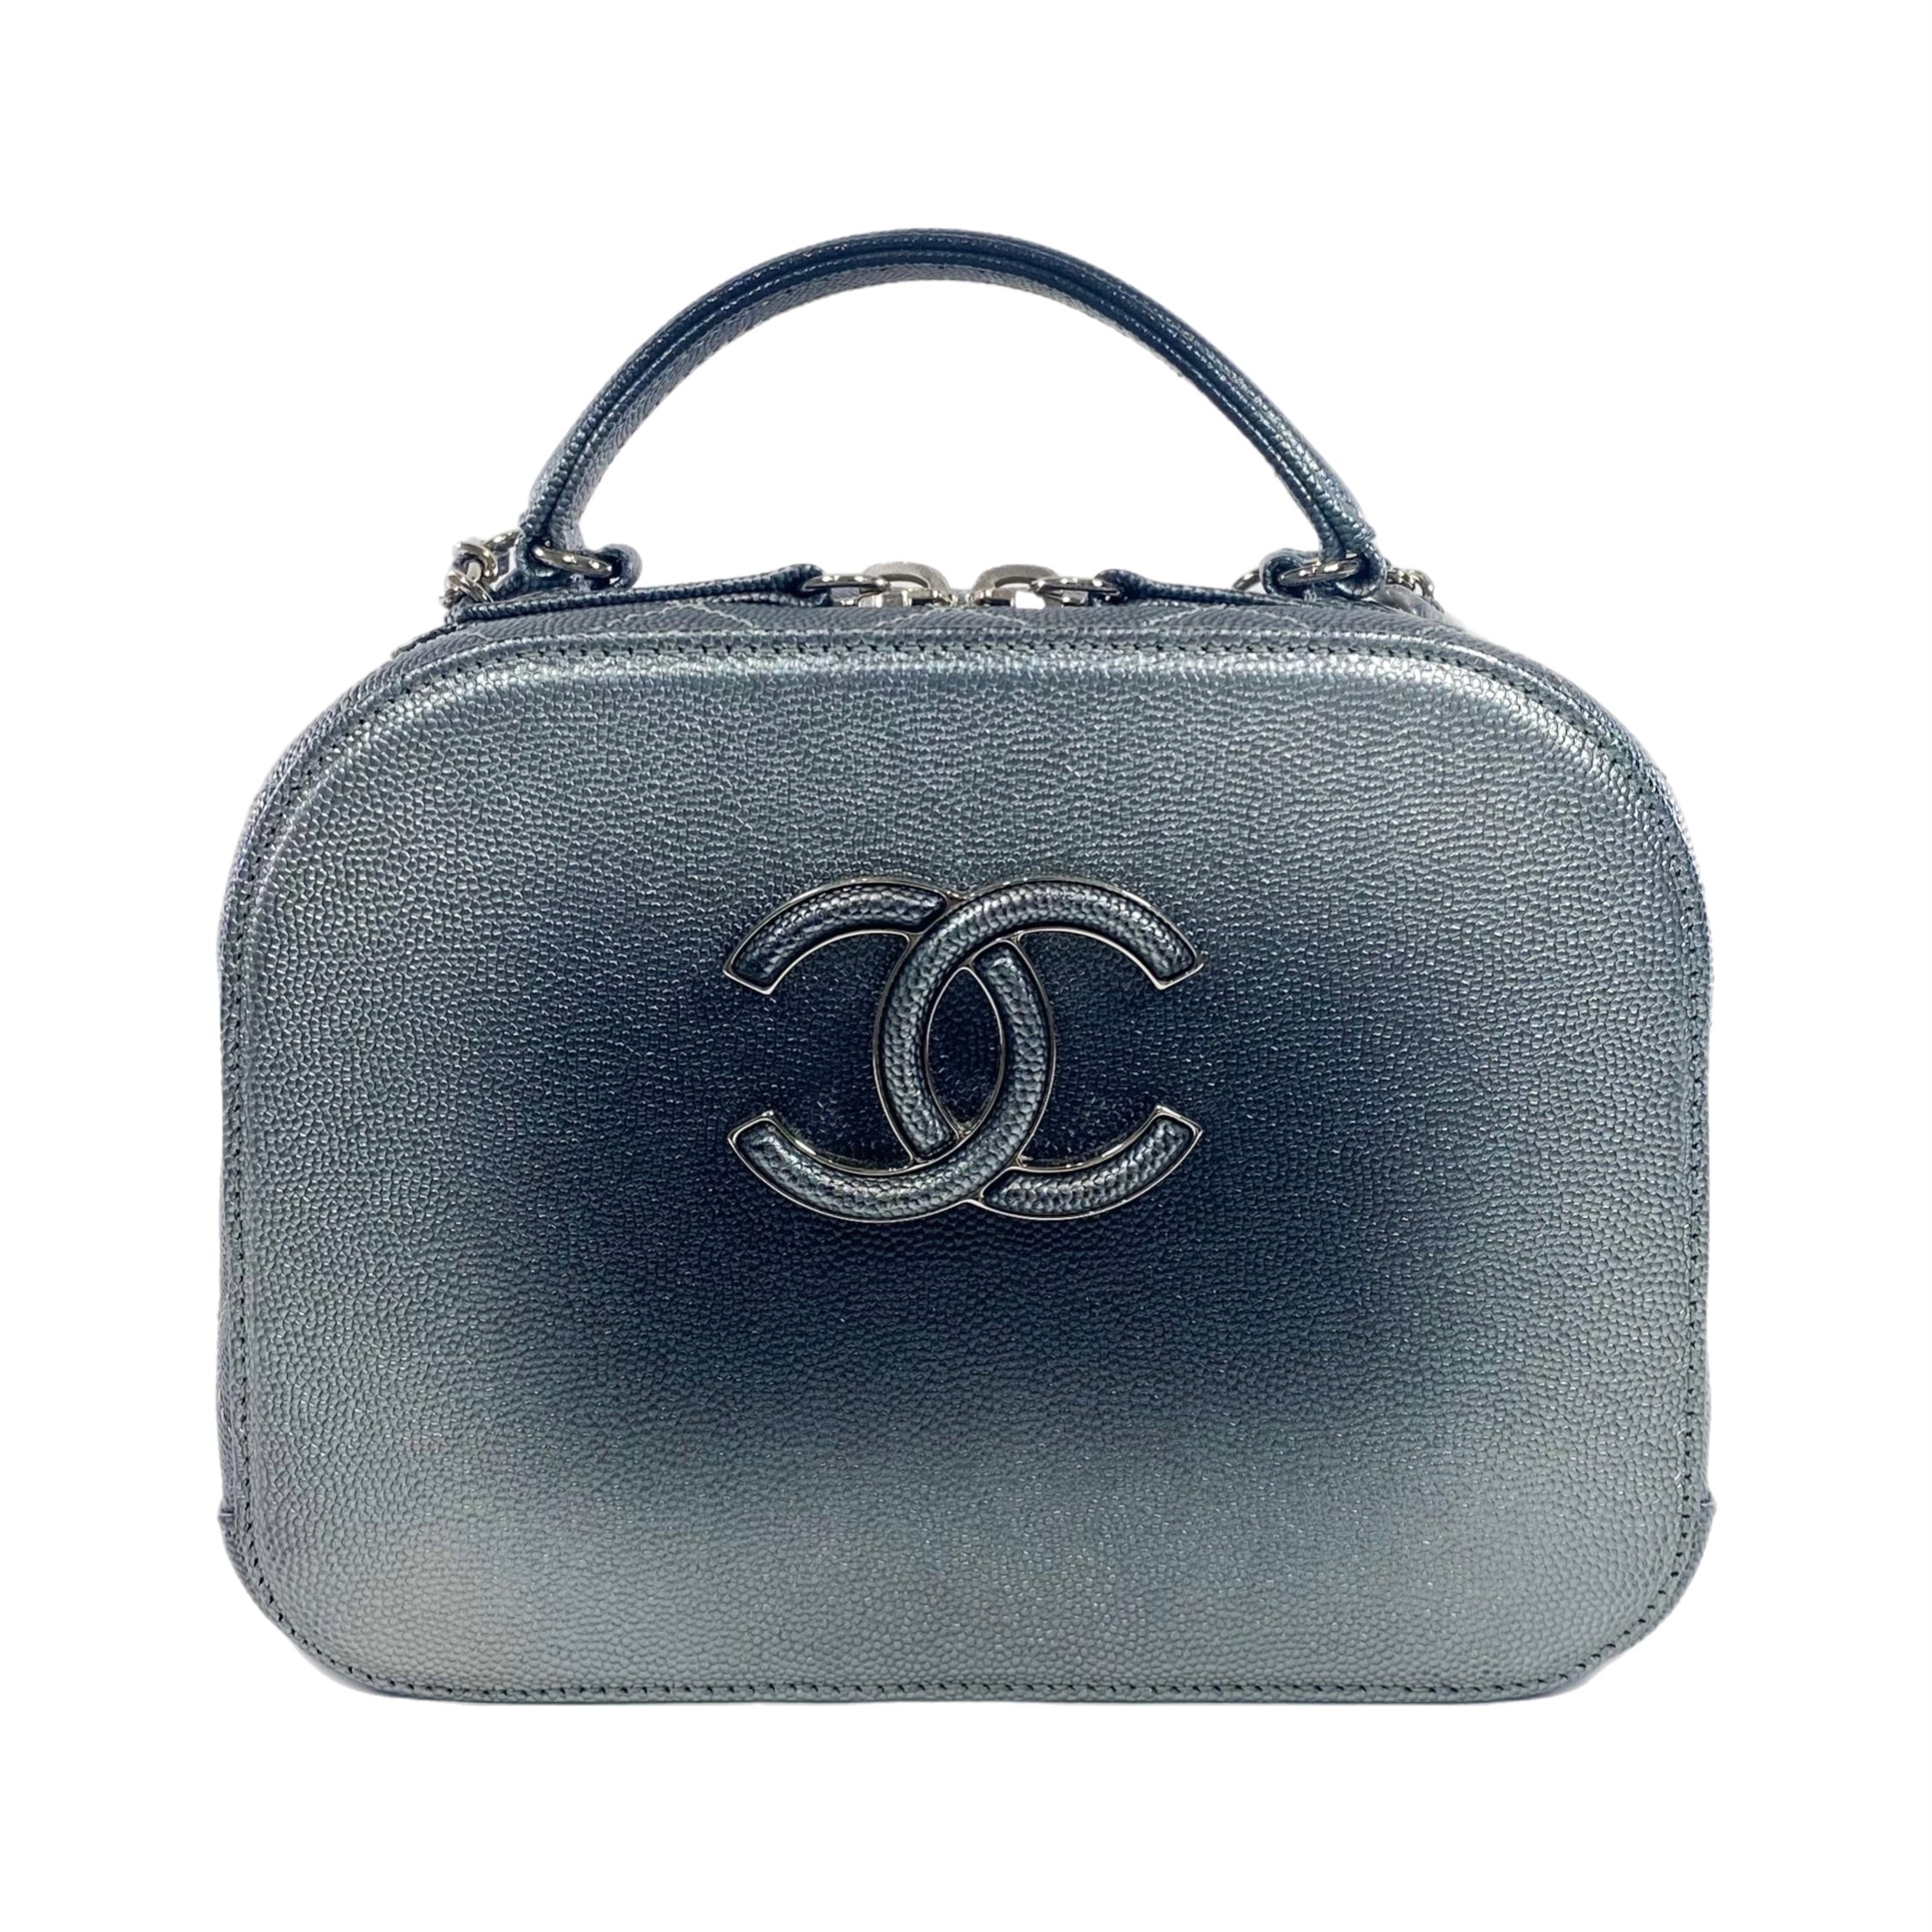 Chanel Navy Blue Quilted Caviar Leather Mini Coco Top Handle Bag Chanel